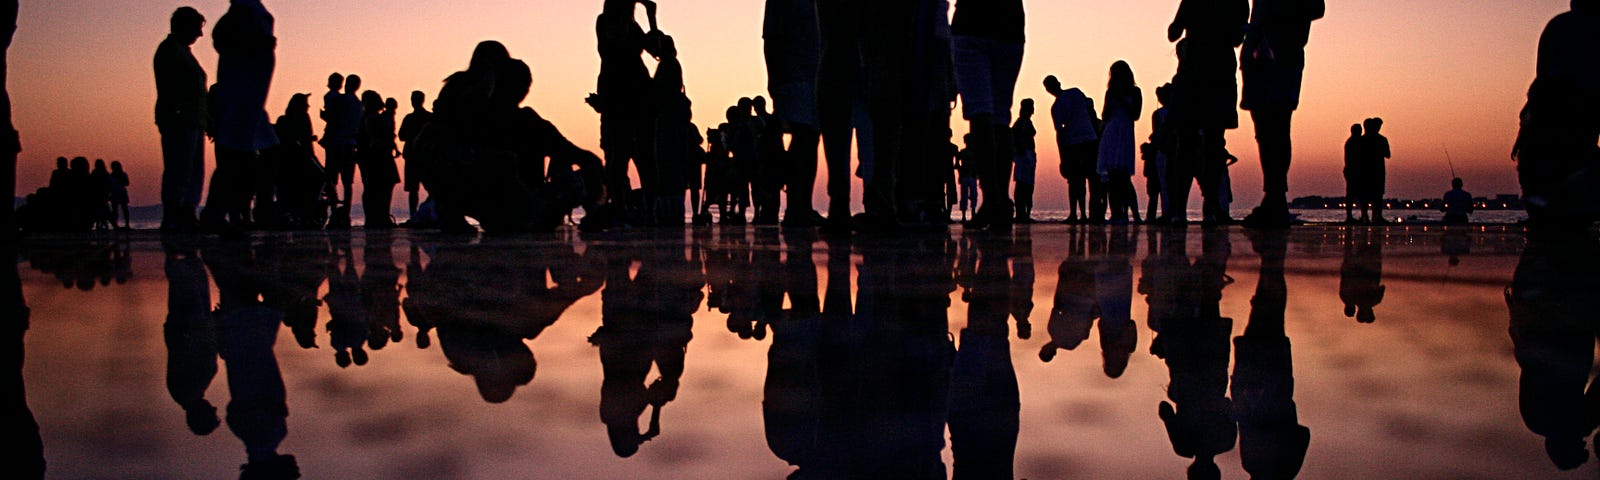 Silhouettes of numerous individuals at twilight with their reflections below them.